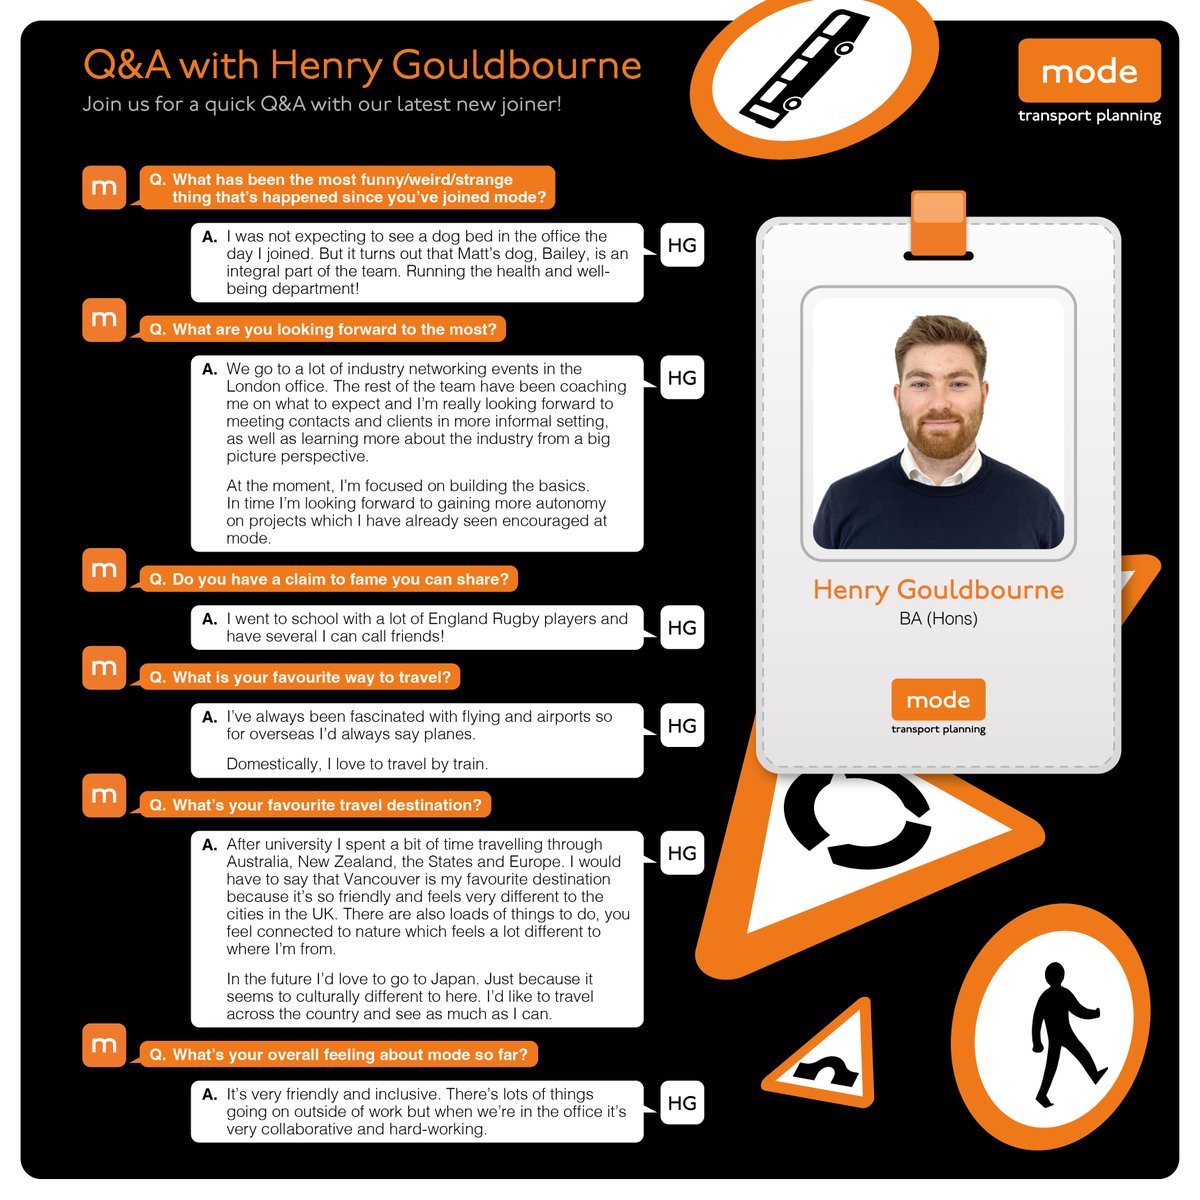 We caught up with mode’s newest recruit, Henry Gouldbourne, who joins as a graduate transport planner. We found out a bit more about him and his journey so far!

#themodeway #londonjobs #london #jobsearch #jobs #recruitment #hiring #jobsinlondon #hiringnow #careers #job